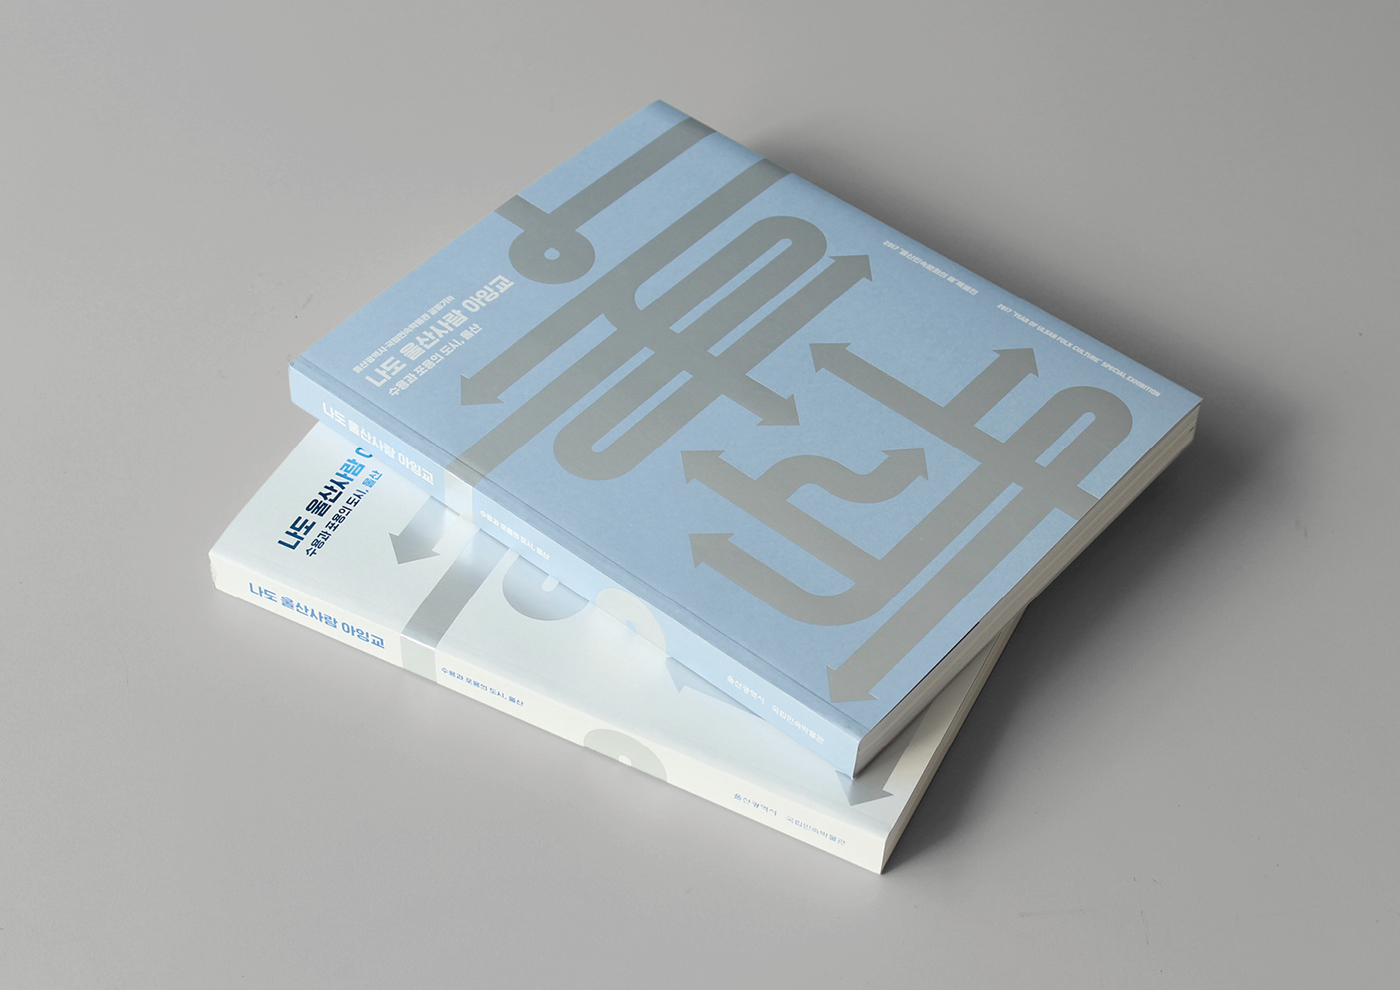 ulsan city Exhibition  editorial design  Bookdesign people 울산박물관 국립민속박물관